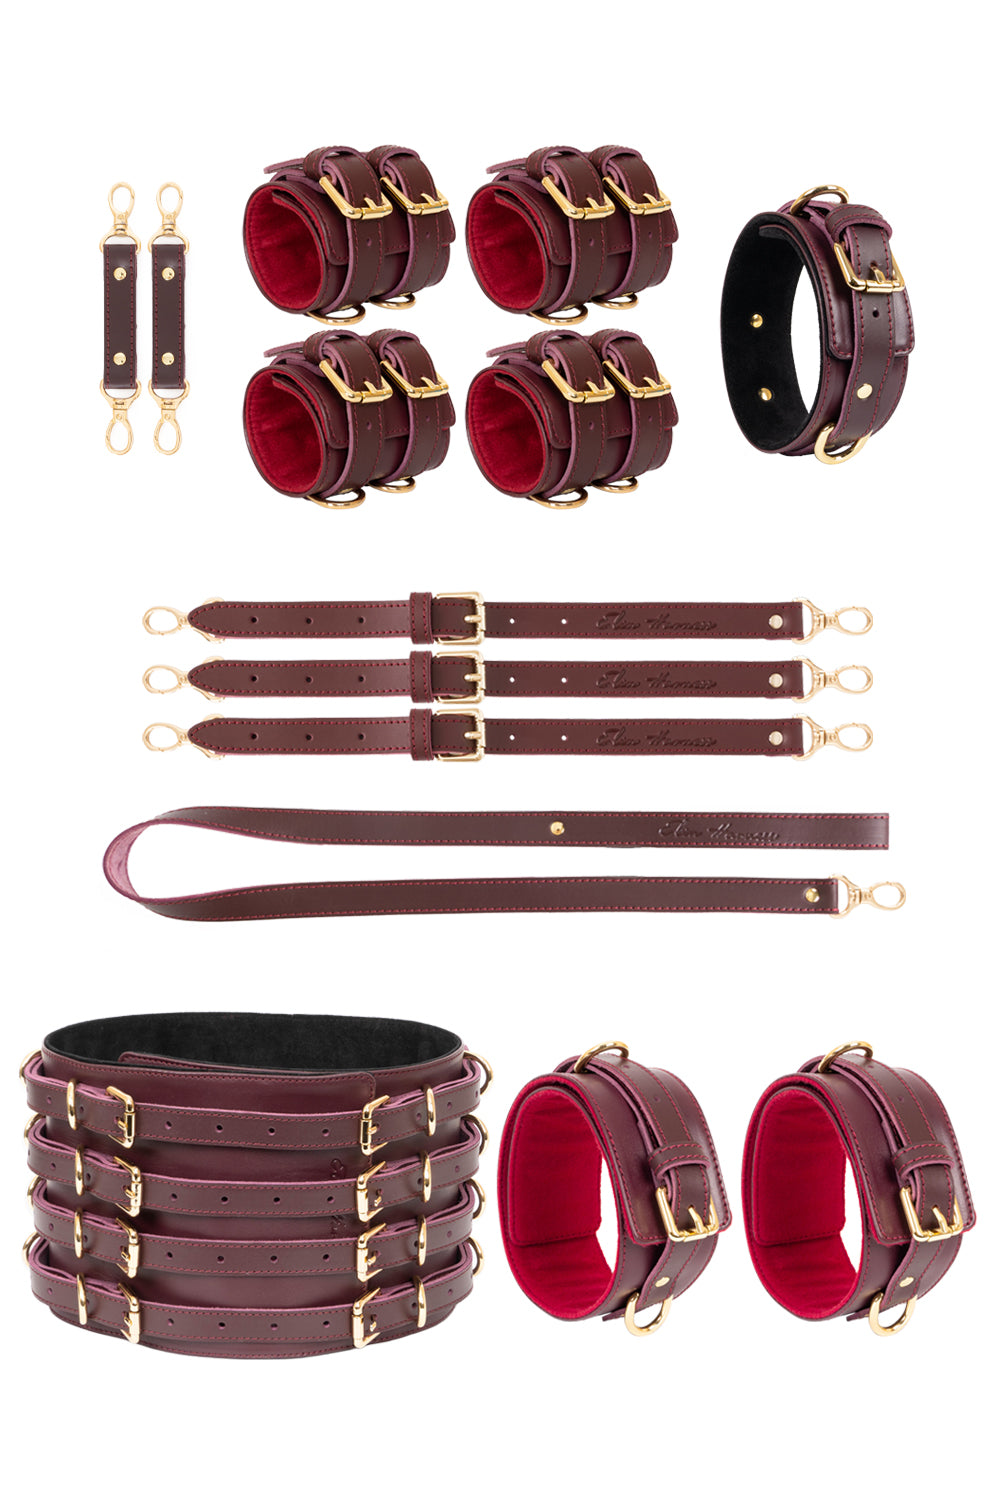 Burgundy Luxury Full Leather Set with Wide Belt and Cuffs